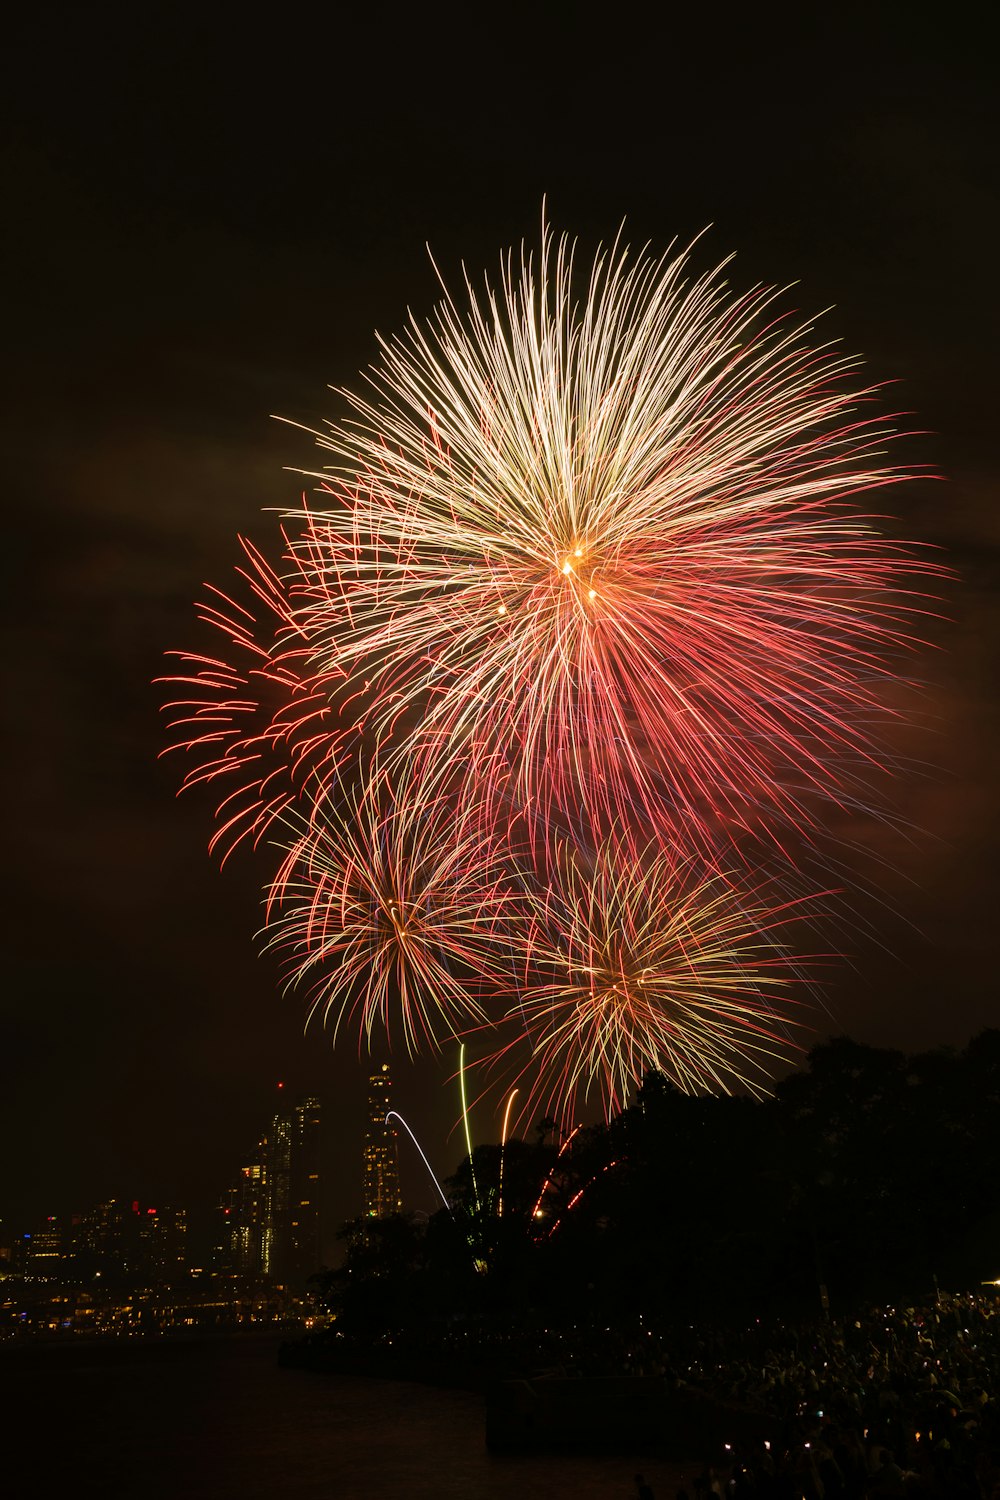 a firework display in the night sky over a city